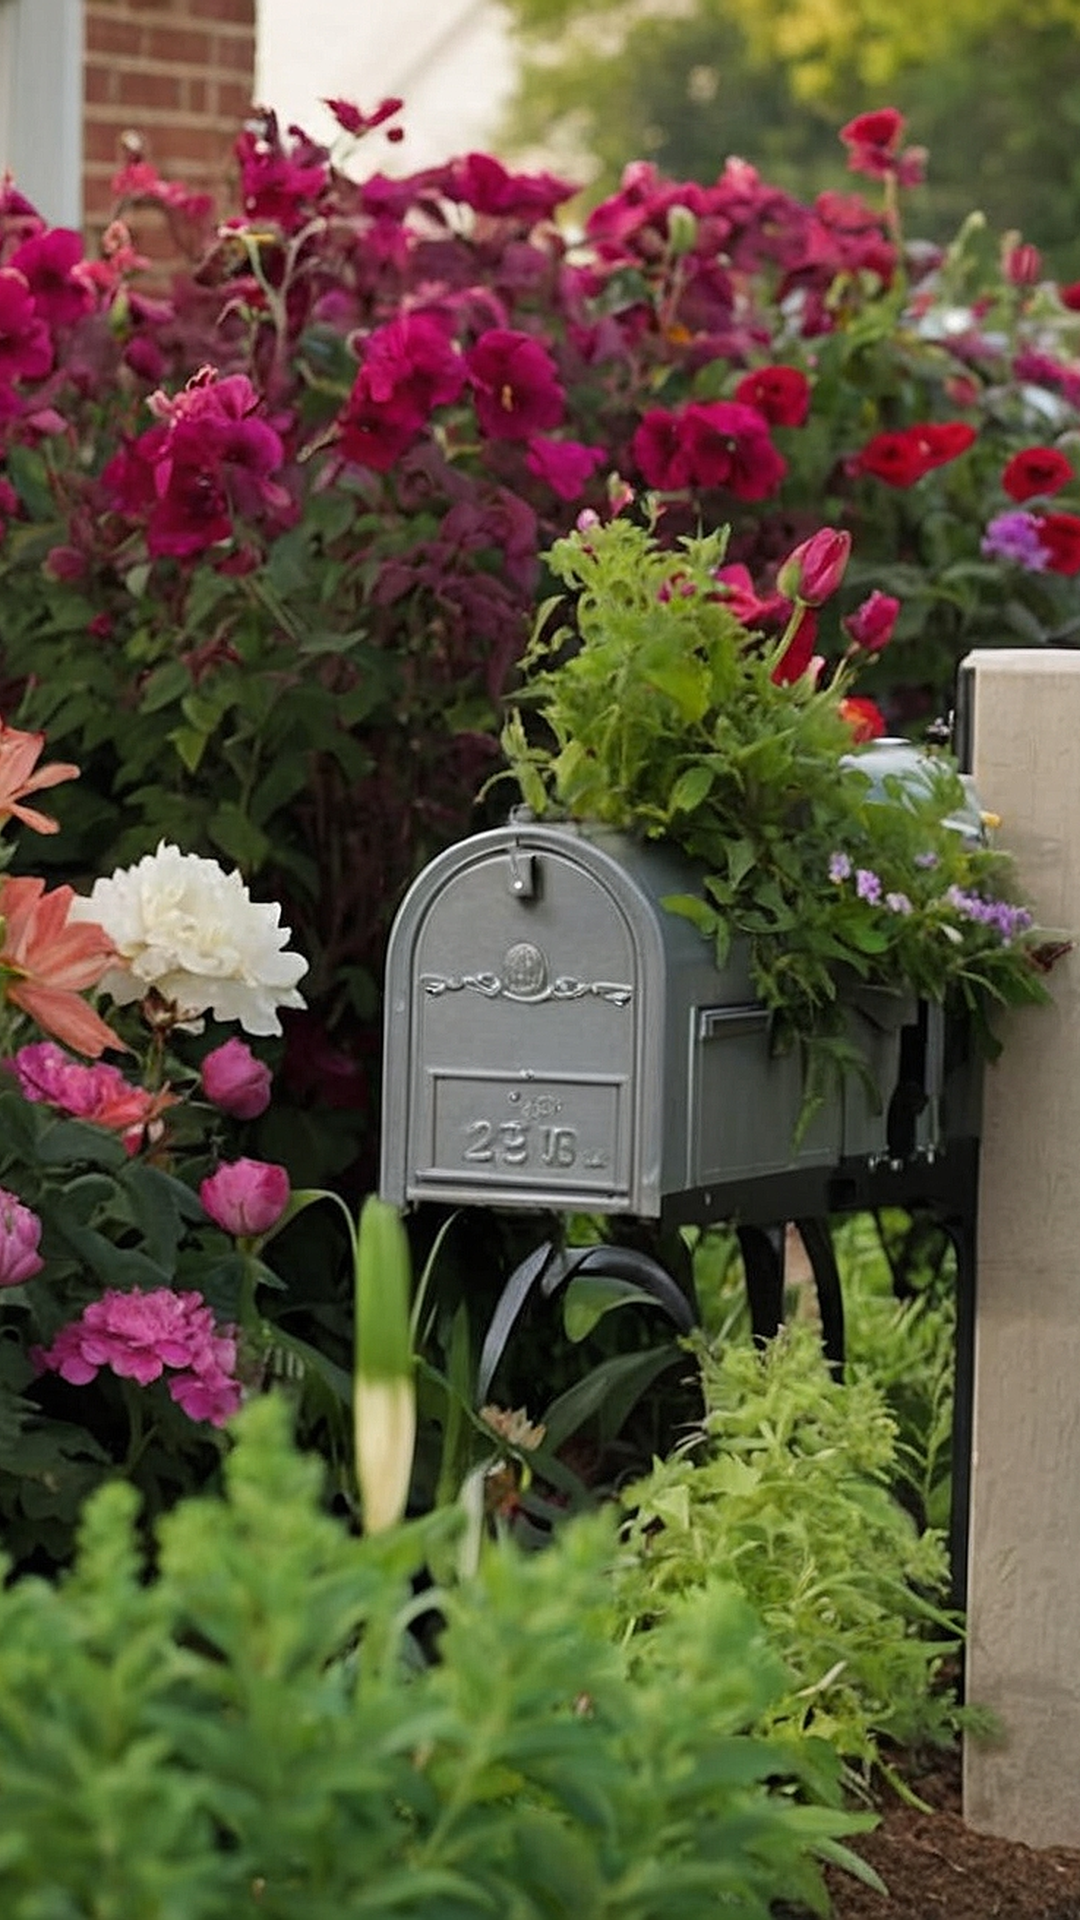 Florally Framed Mailboxes: Garden Bed Trends